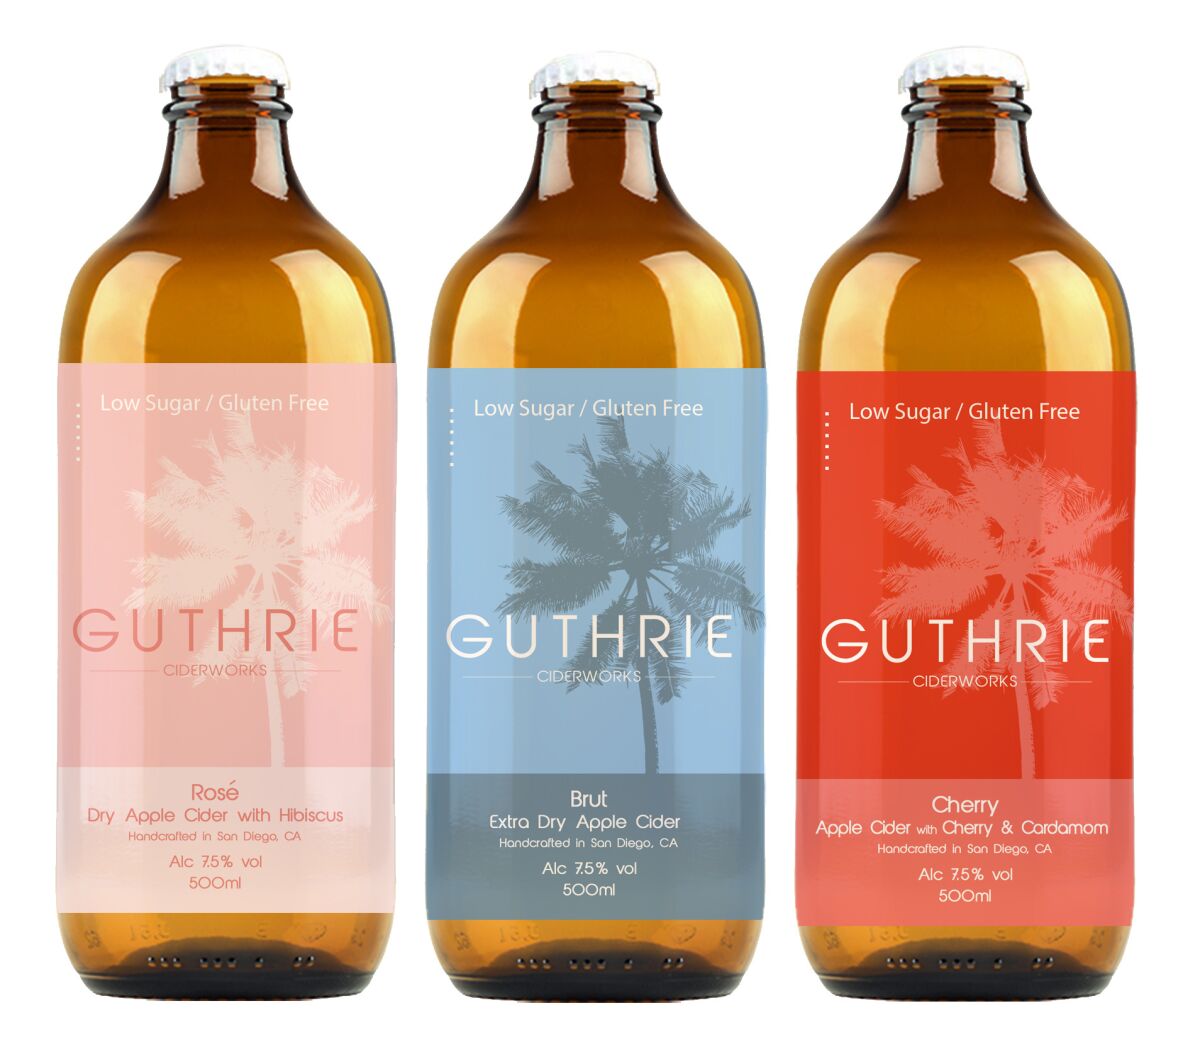 Guthrie is sold by the can and by the bottle in a variety of flavors.